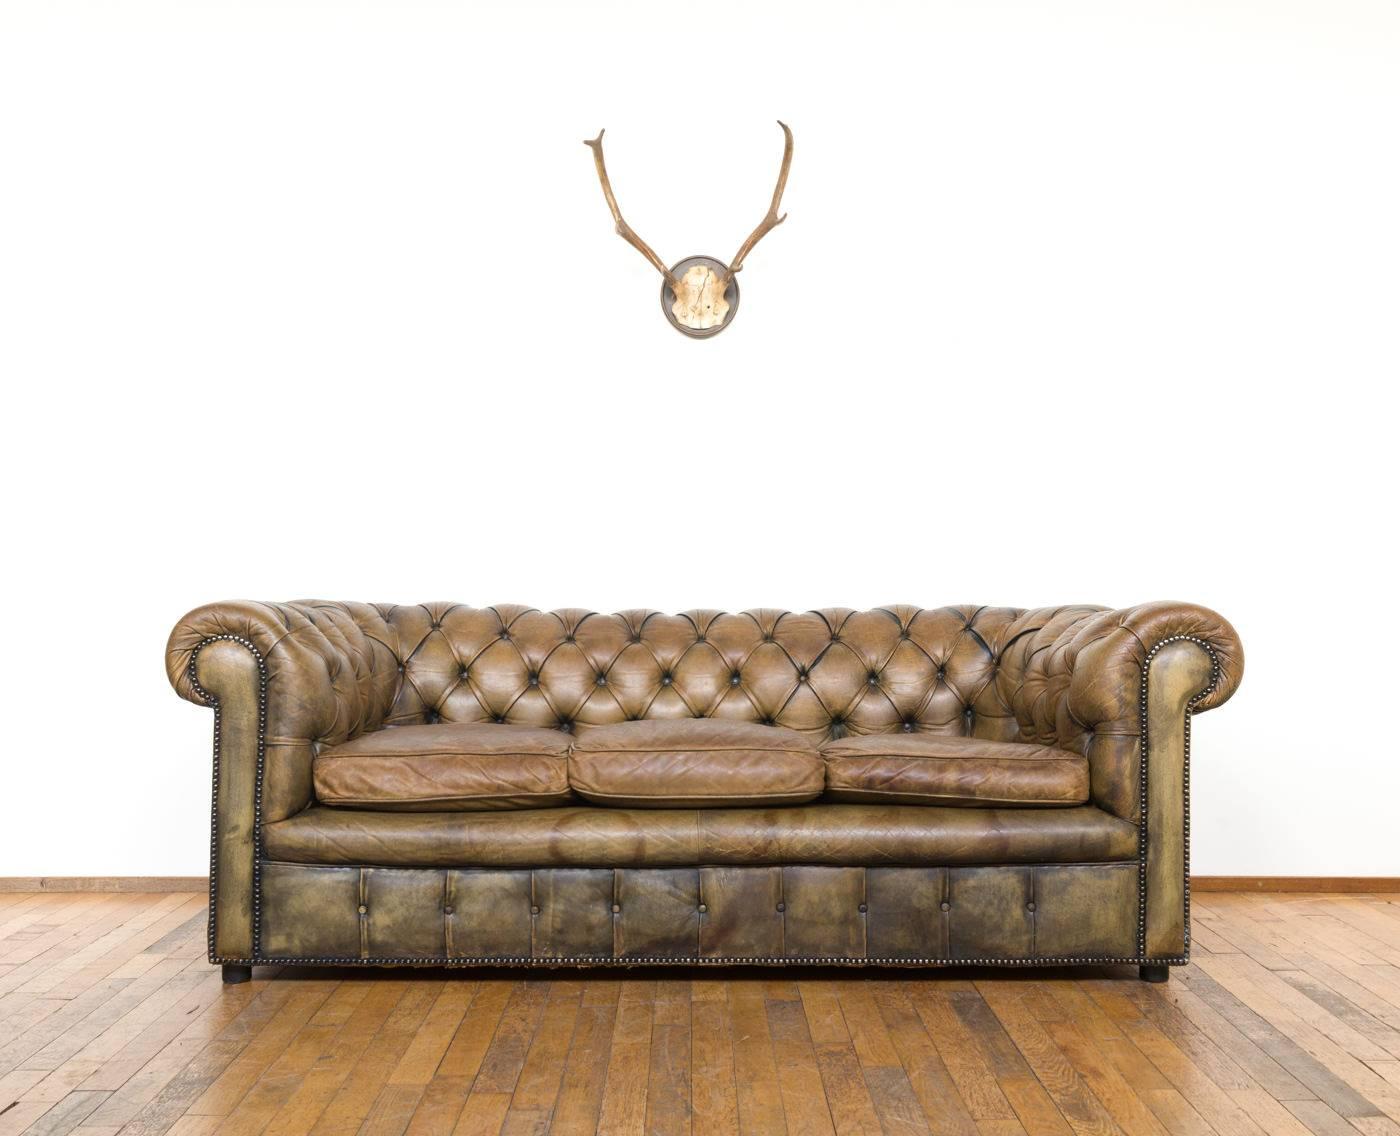 European Vintage 1950s-1960s Chesterfield Sofa in Hand Dyed Tan Olive Green Leather